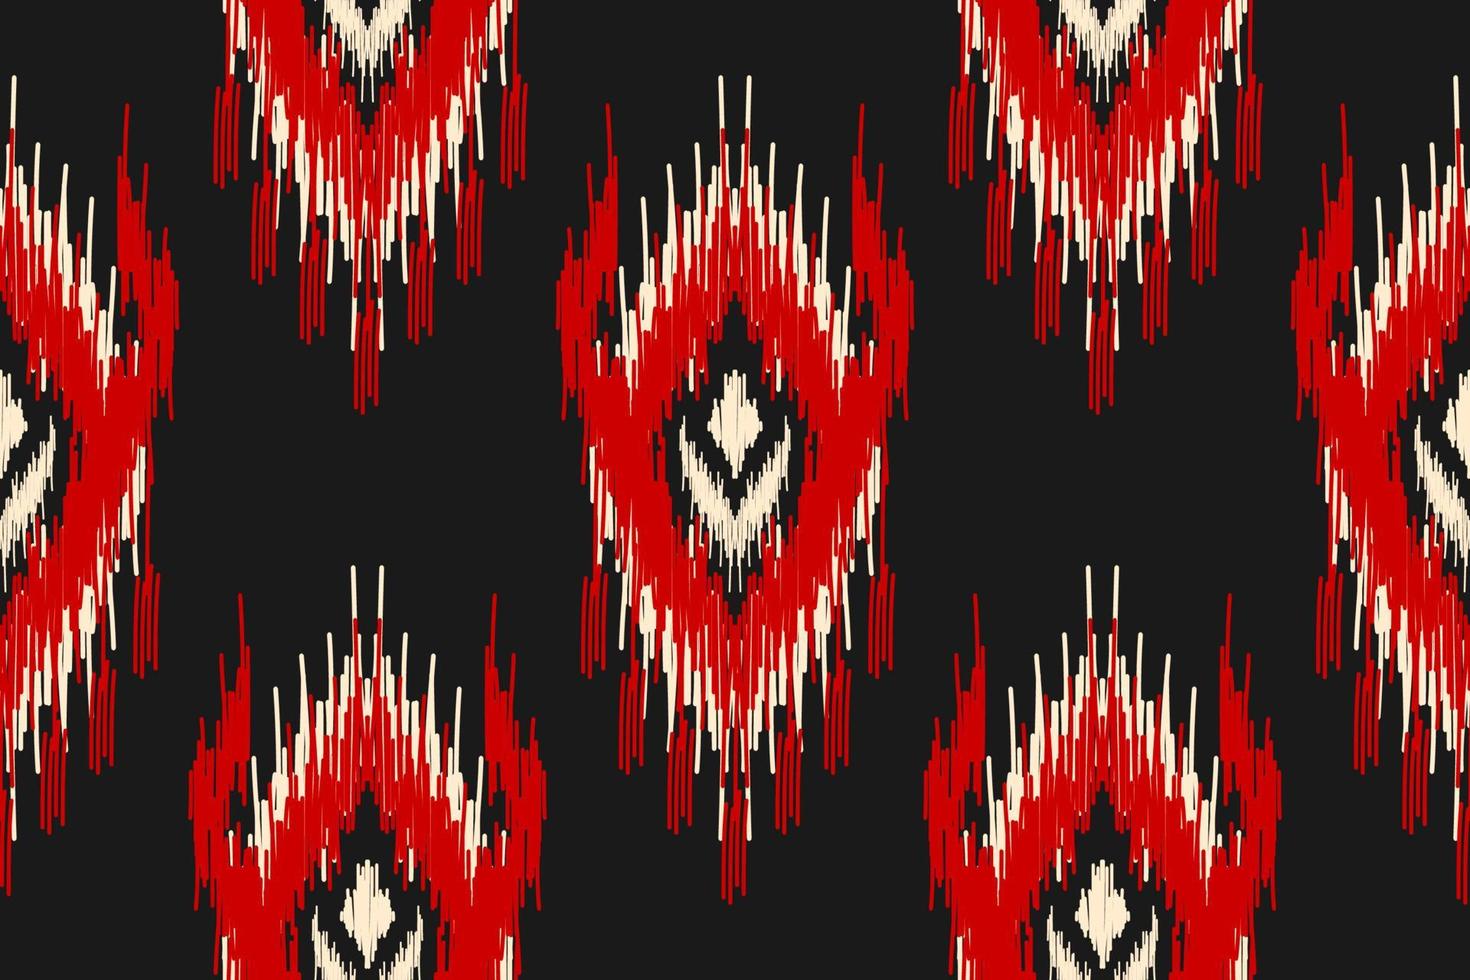 Fabric ikat pattern art. Geometric ethnic seamless pattern traditional. American, Mexican style. vector